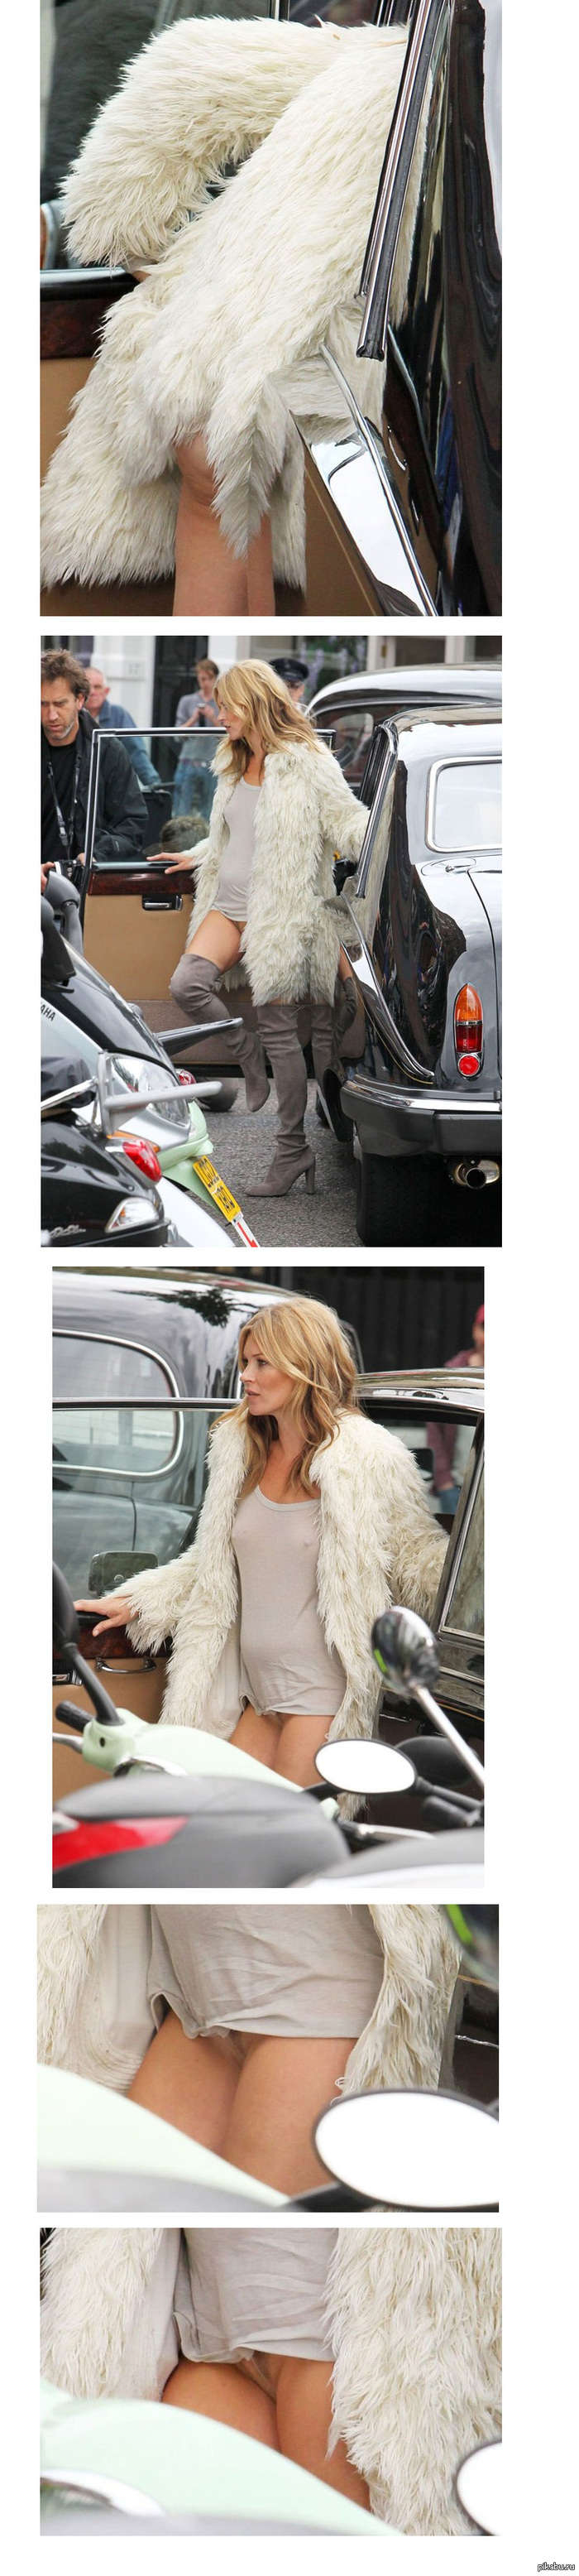 Cellulite Kate Moss came to the shooting of advertising without underwear - NSFW, Kate Moss, Strawberry, Paparazzi